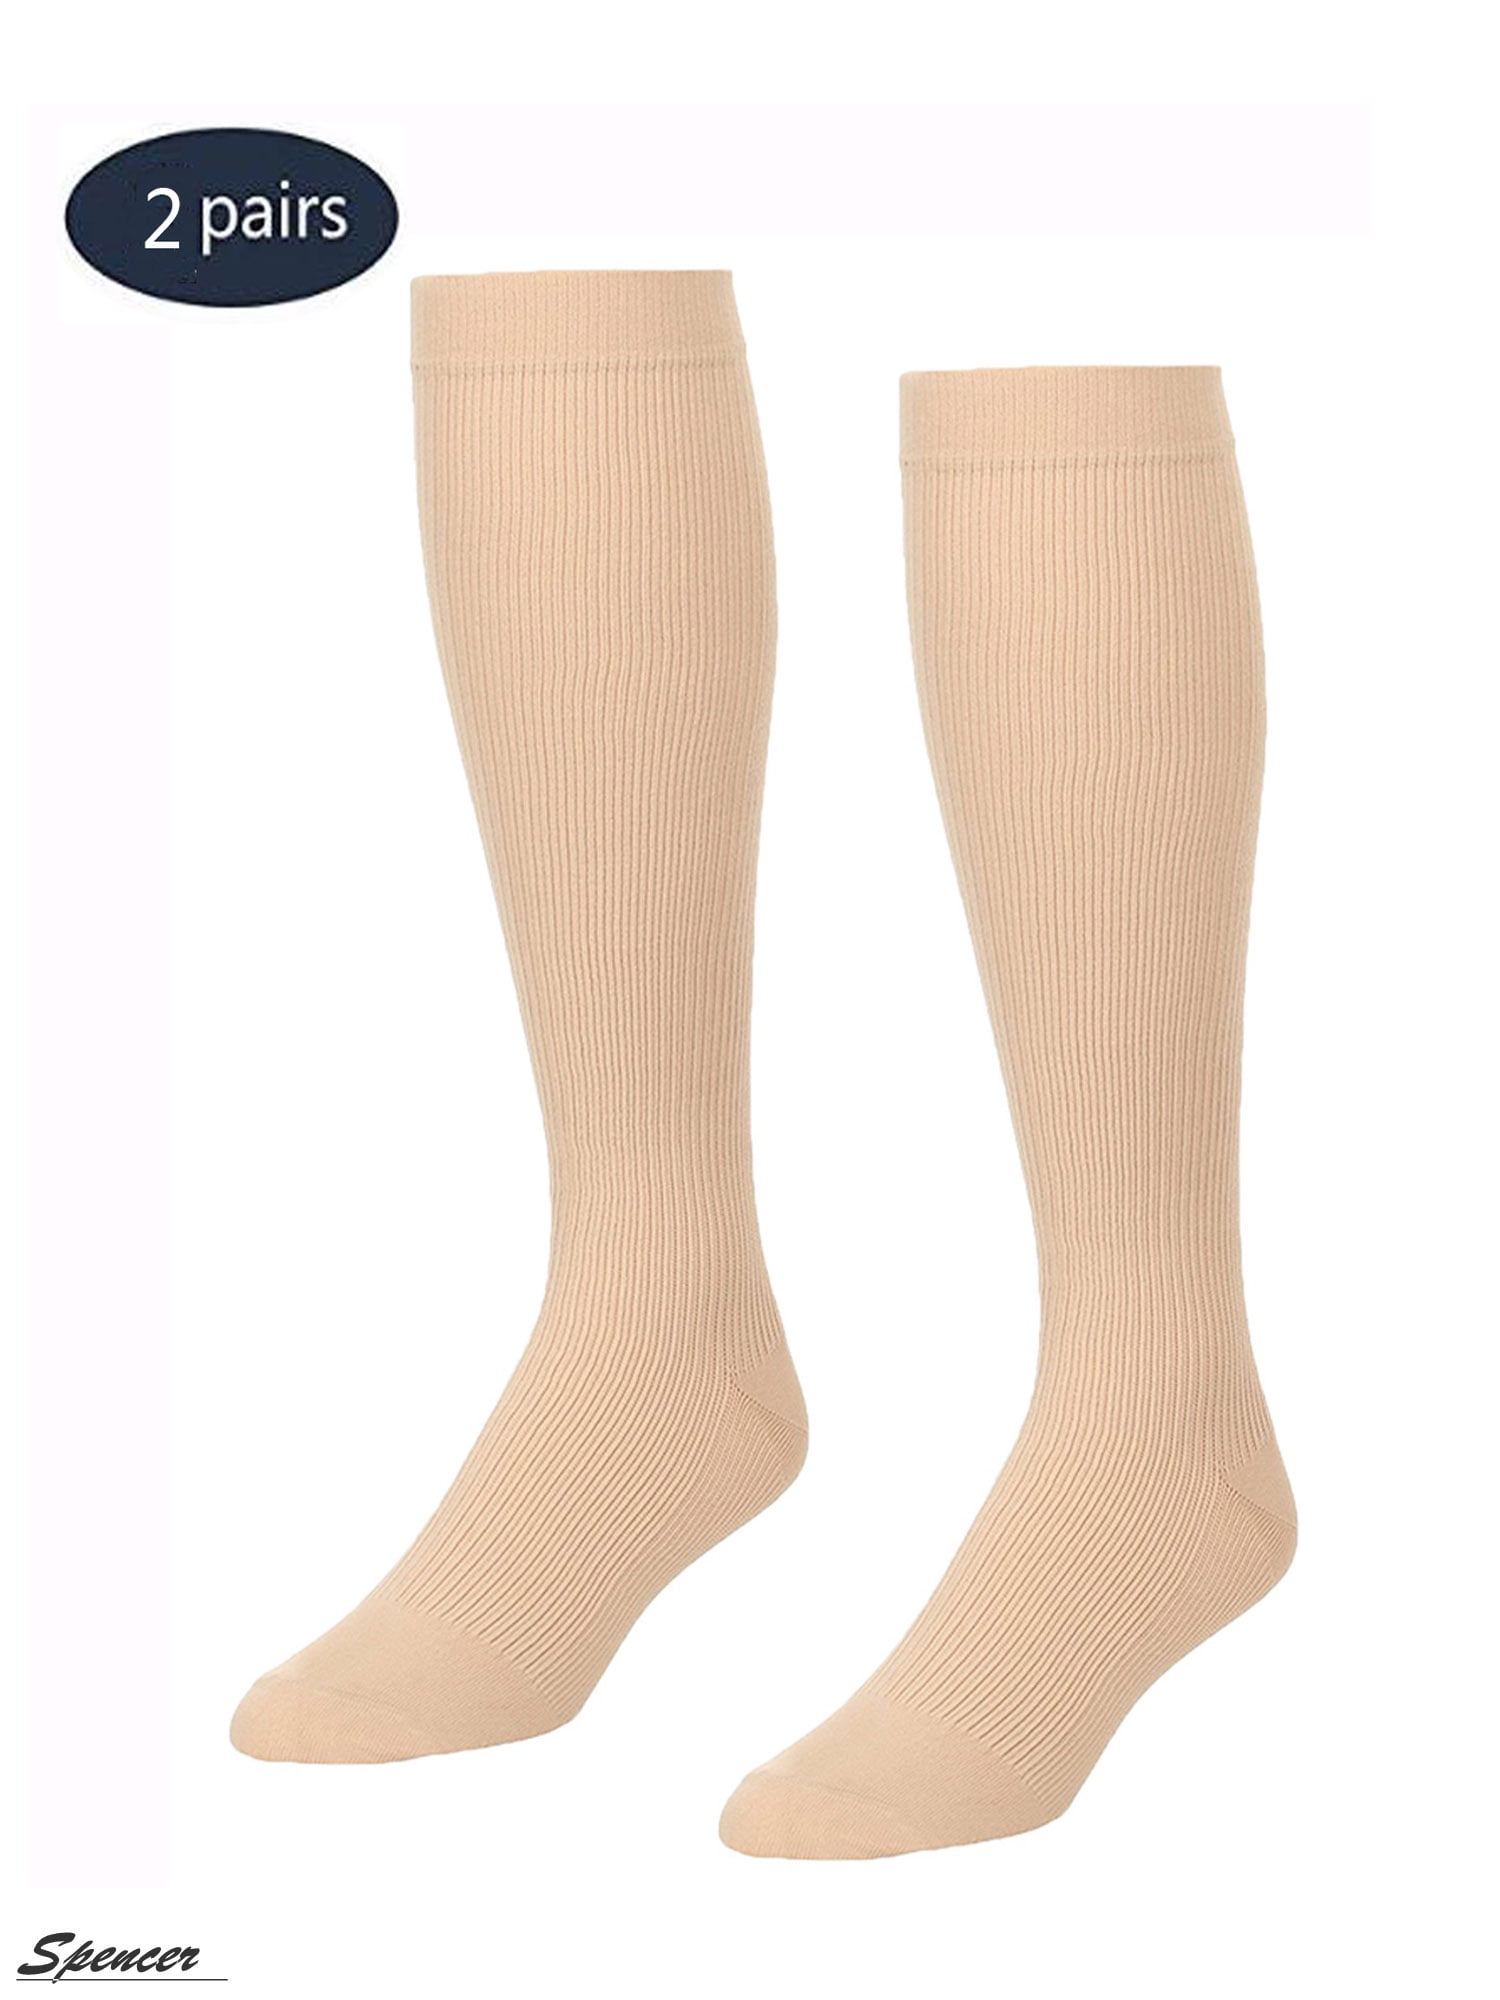 Spencer 2 Pairs Knee High Graduated Compression Socks 10-20mmHg for Men ...